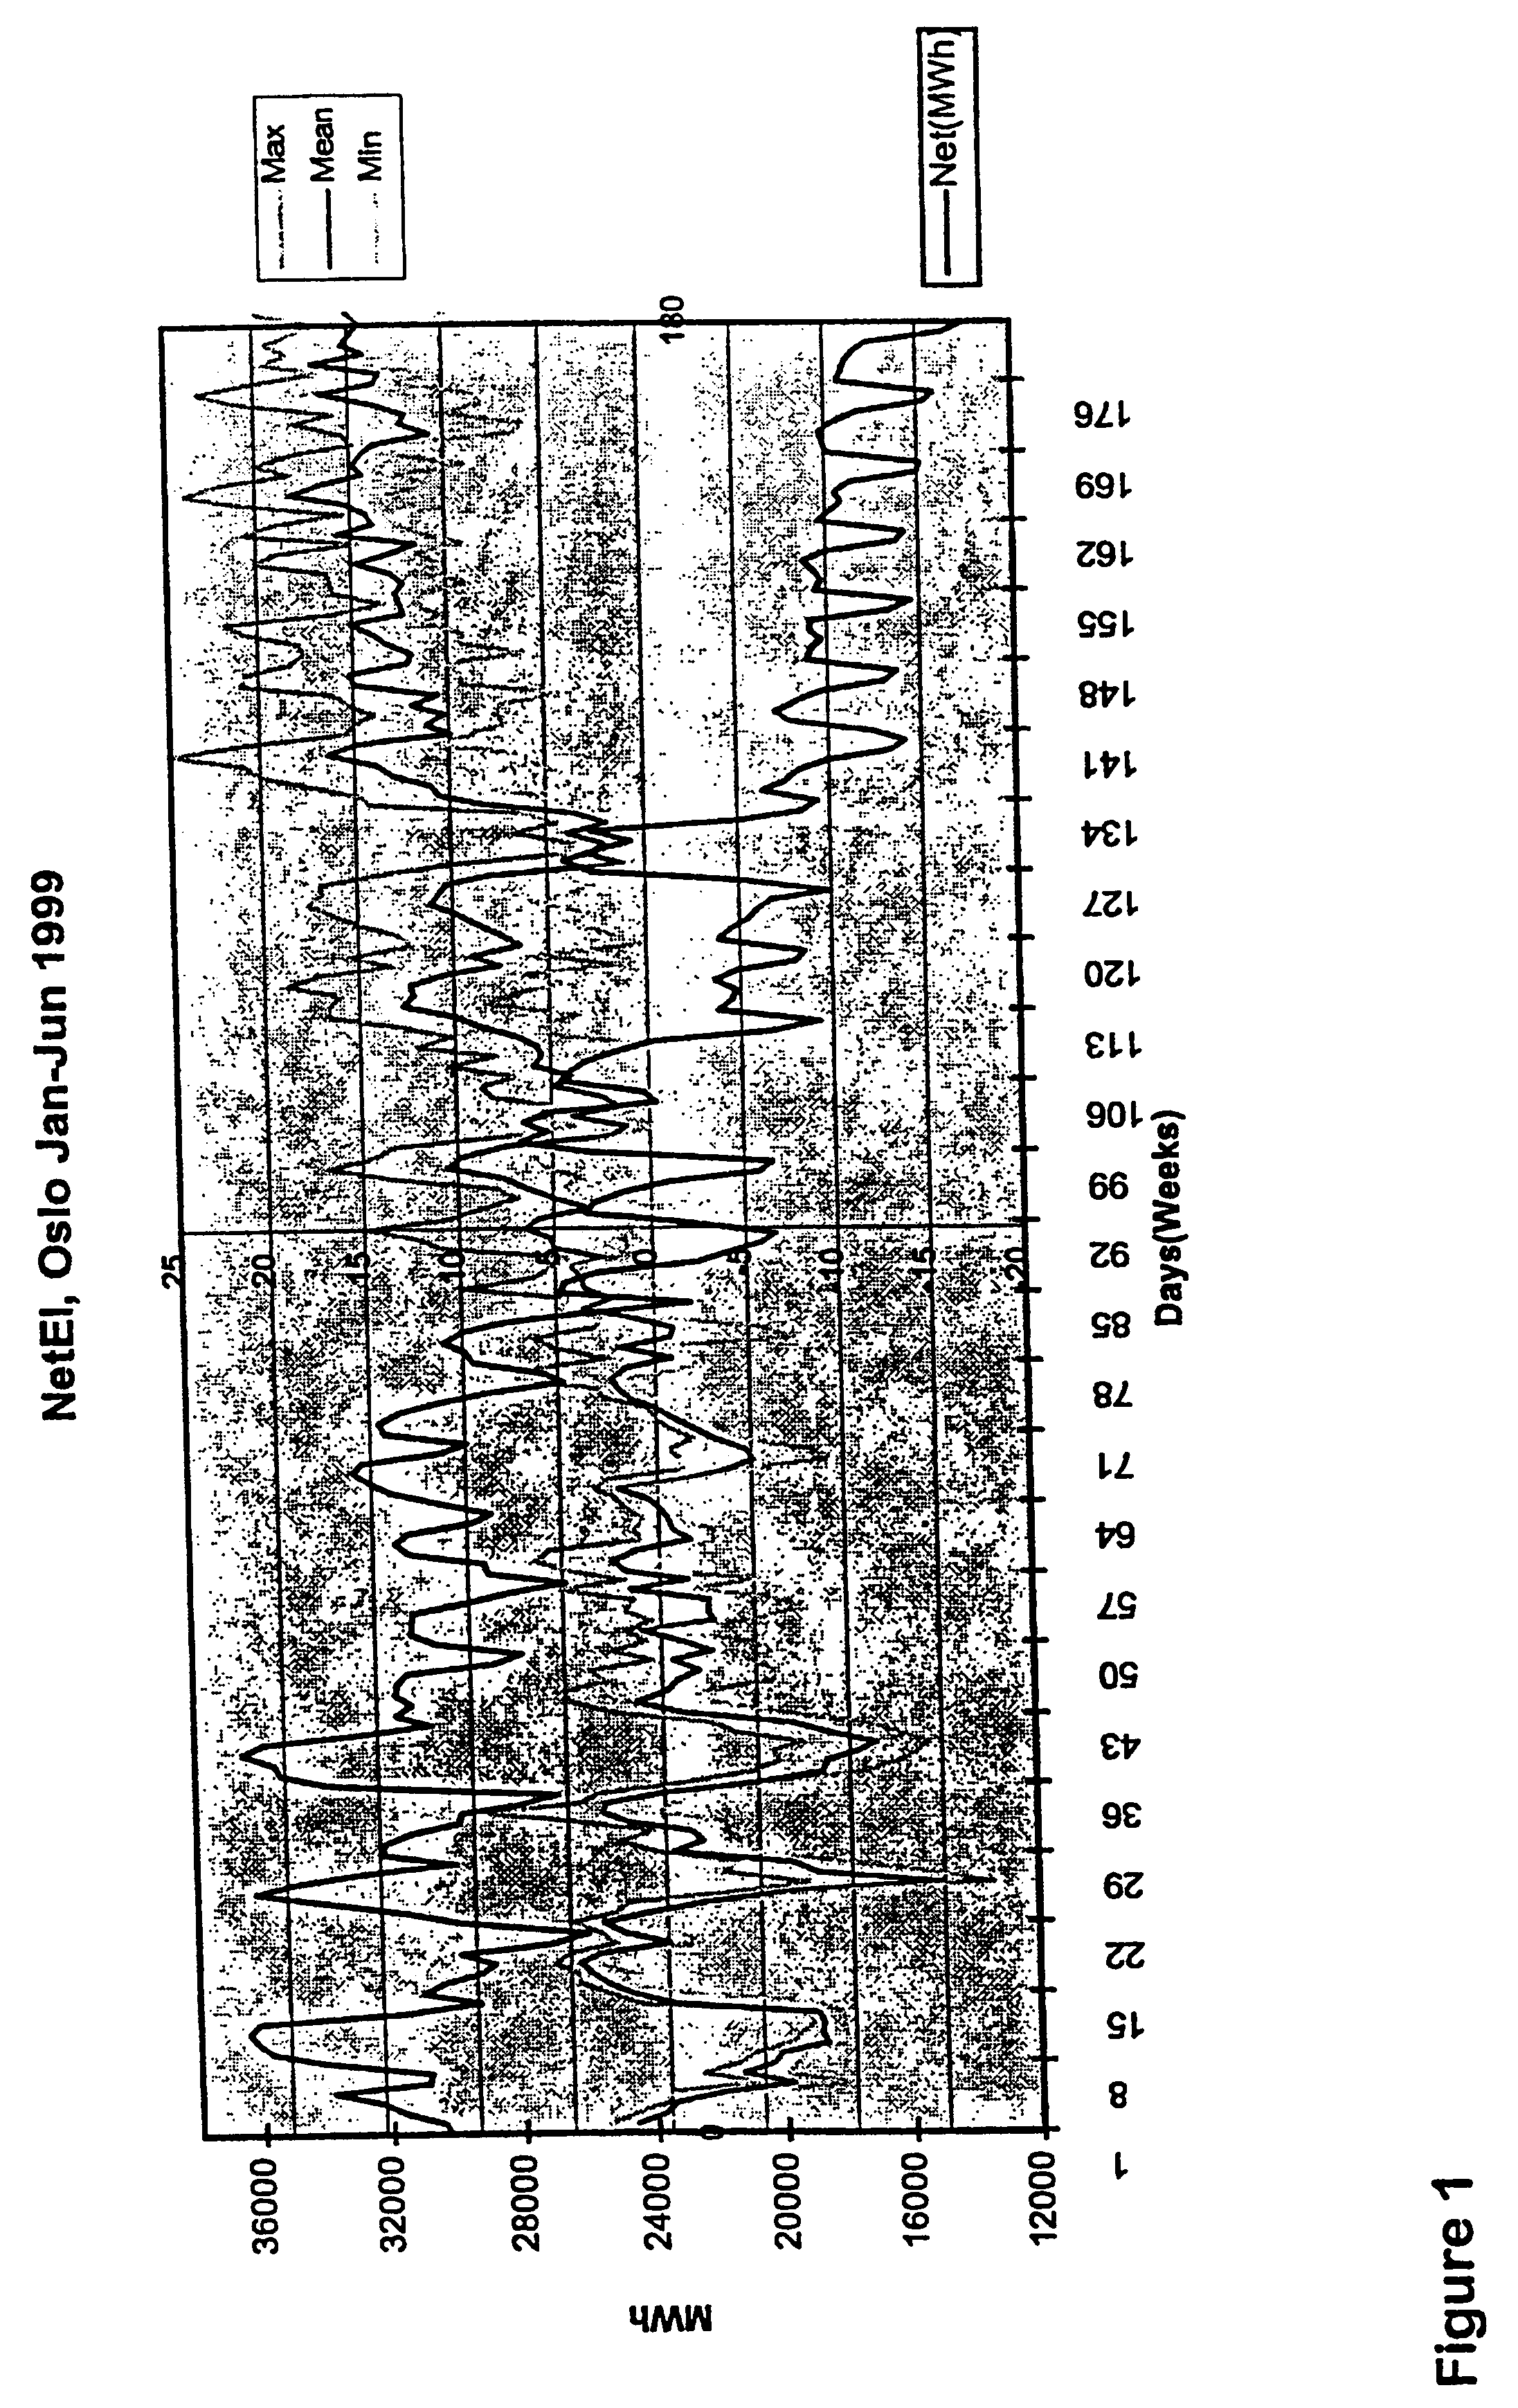 Method and apparatus for heating and cooling of buildings